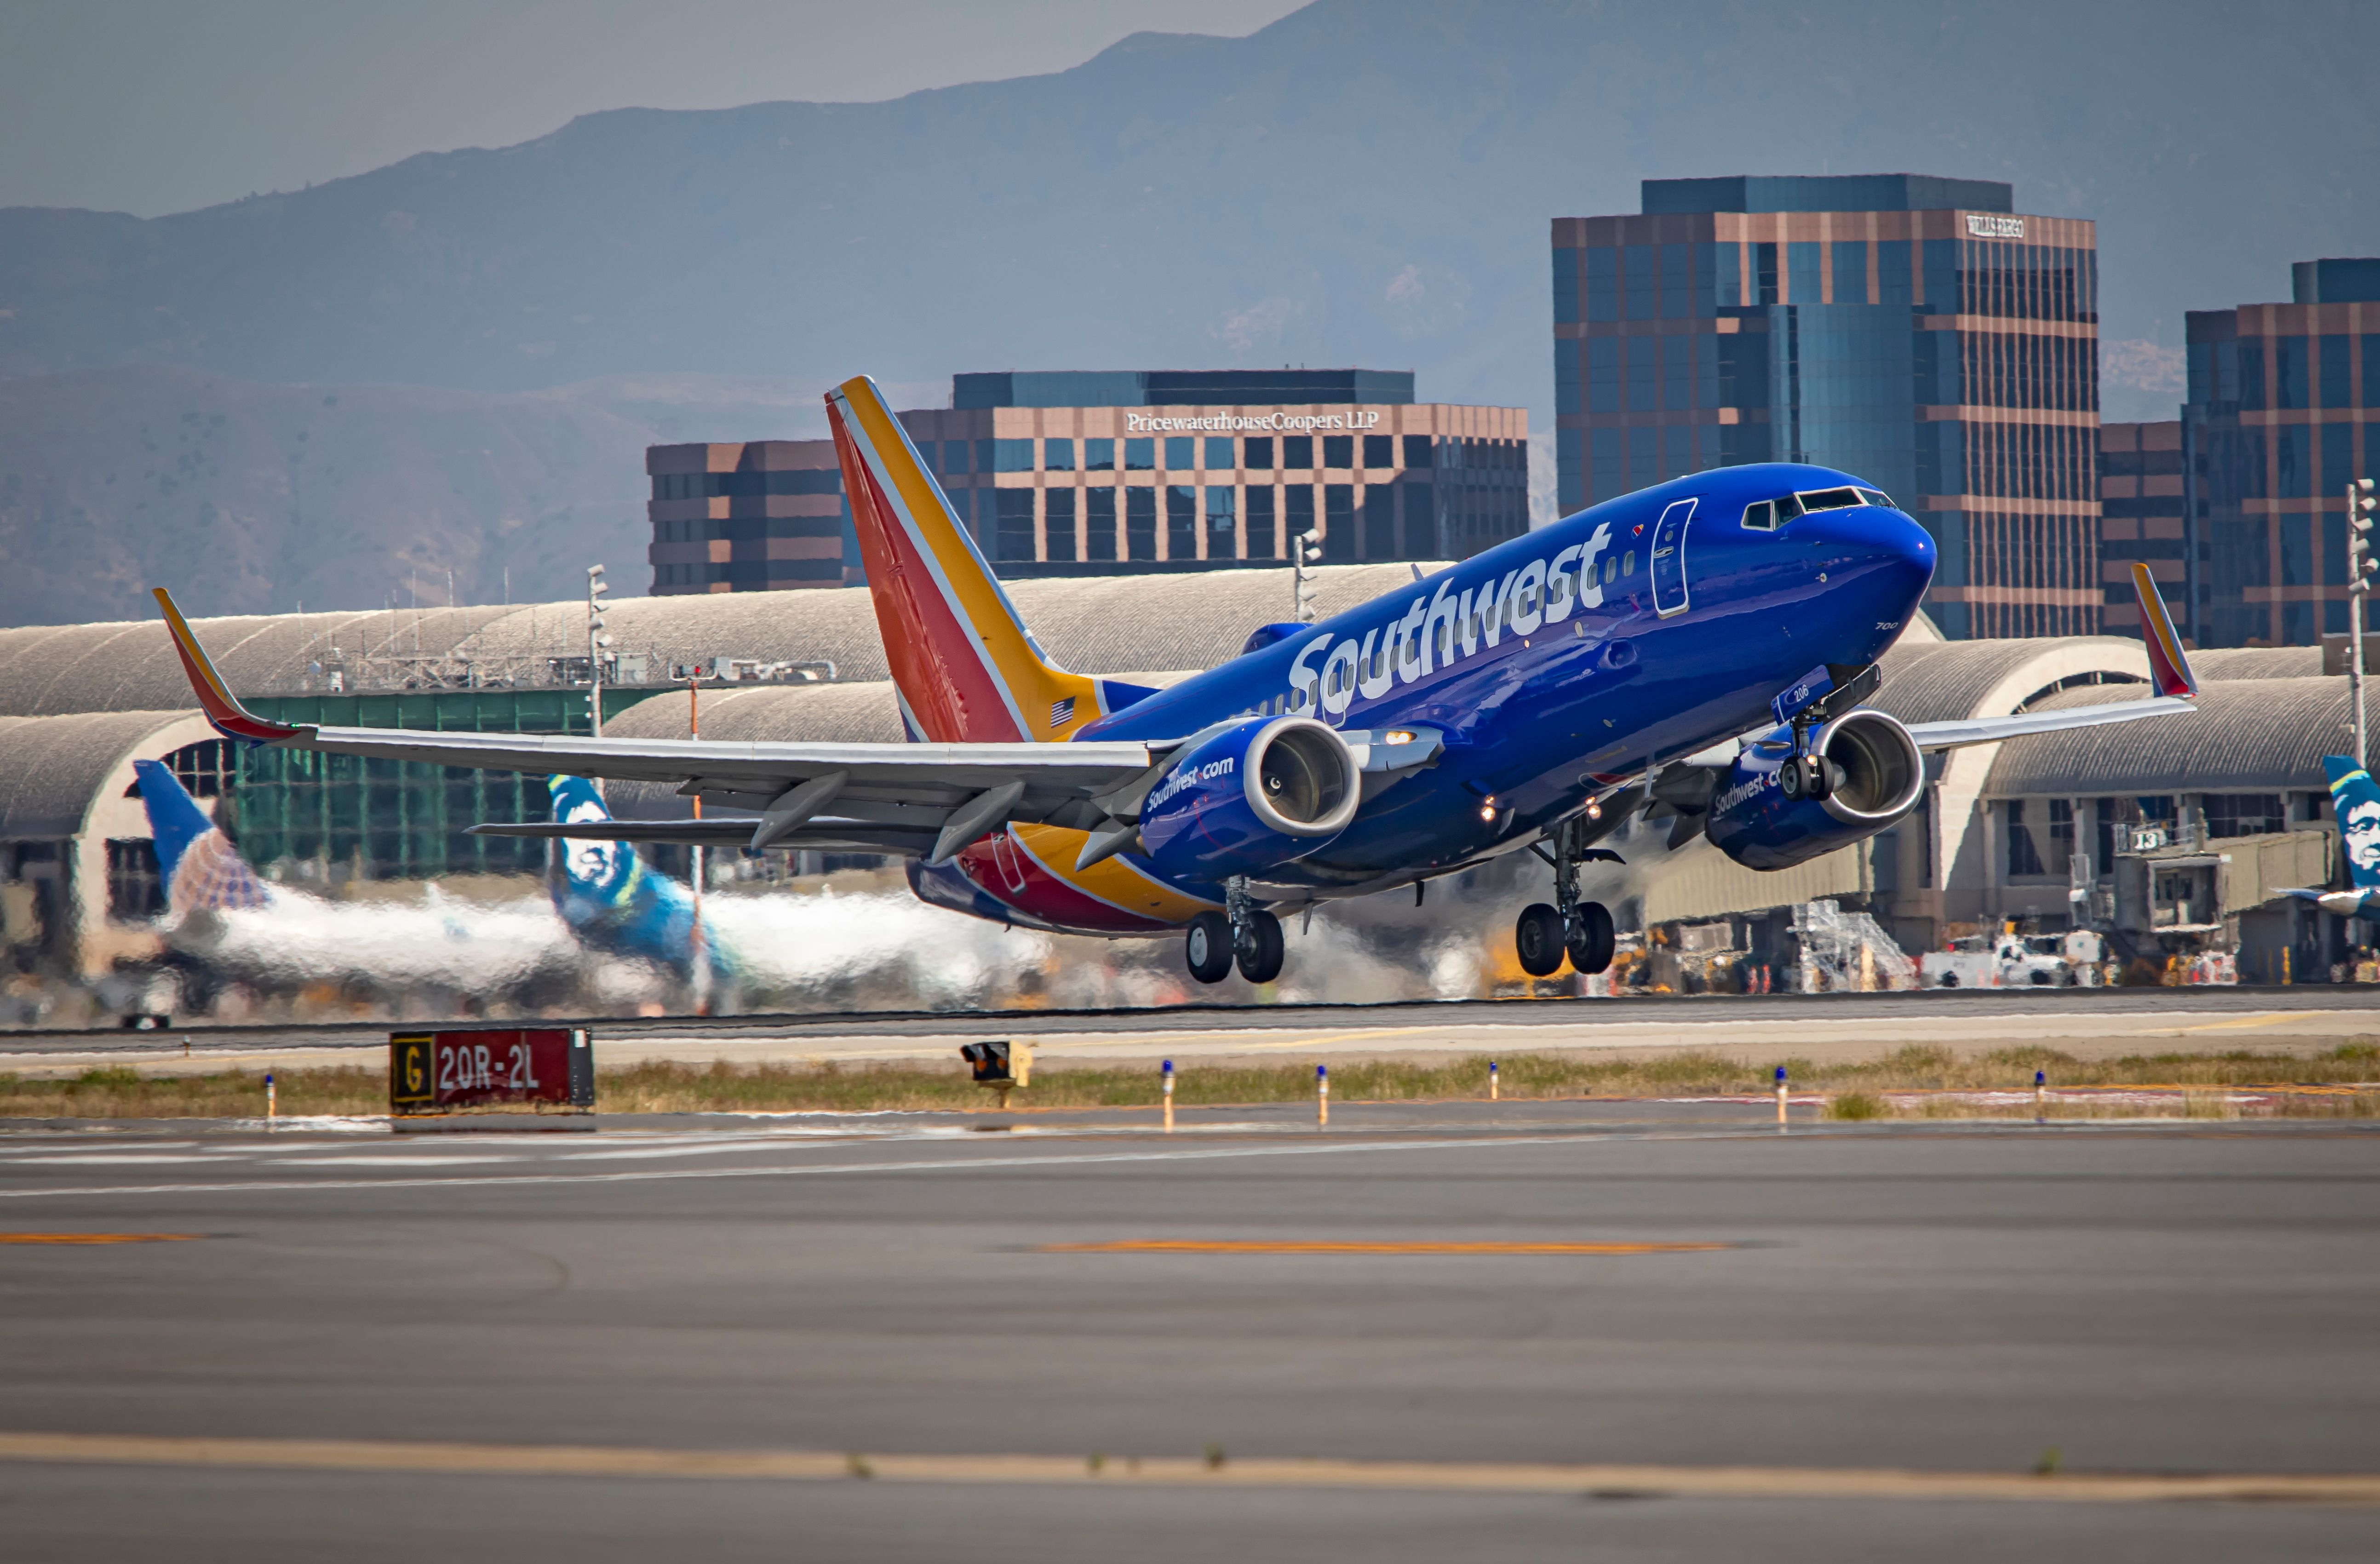 A Southwest Airlines Boeing 737 taking off at Orange County Airport.